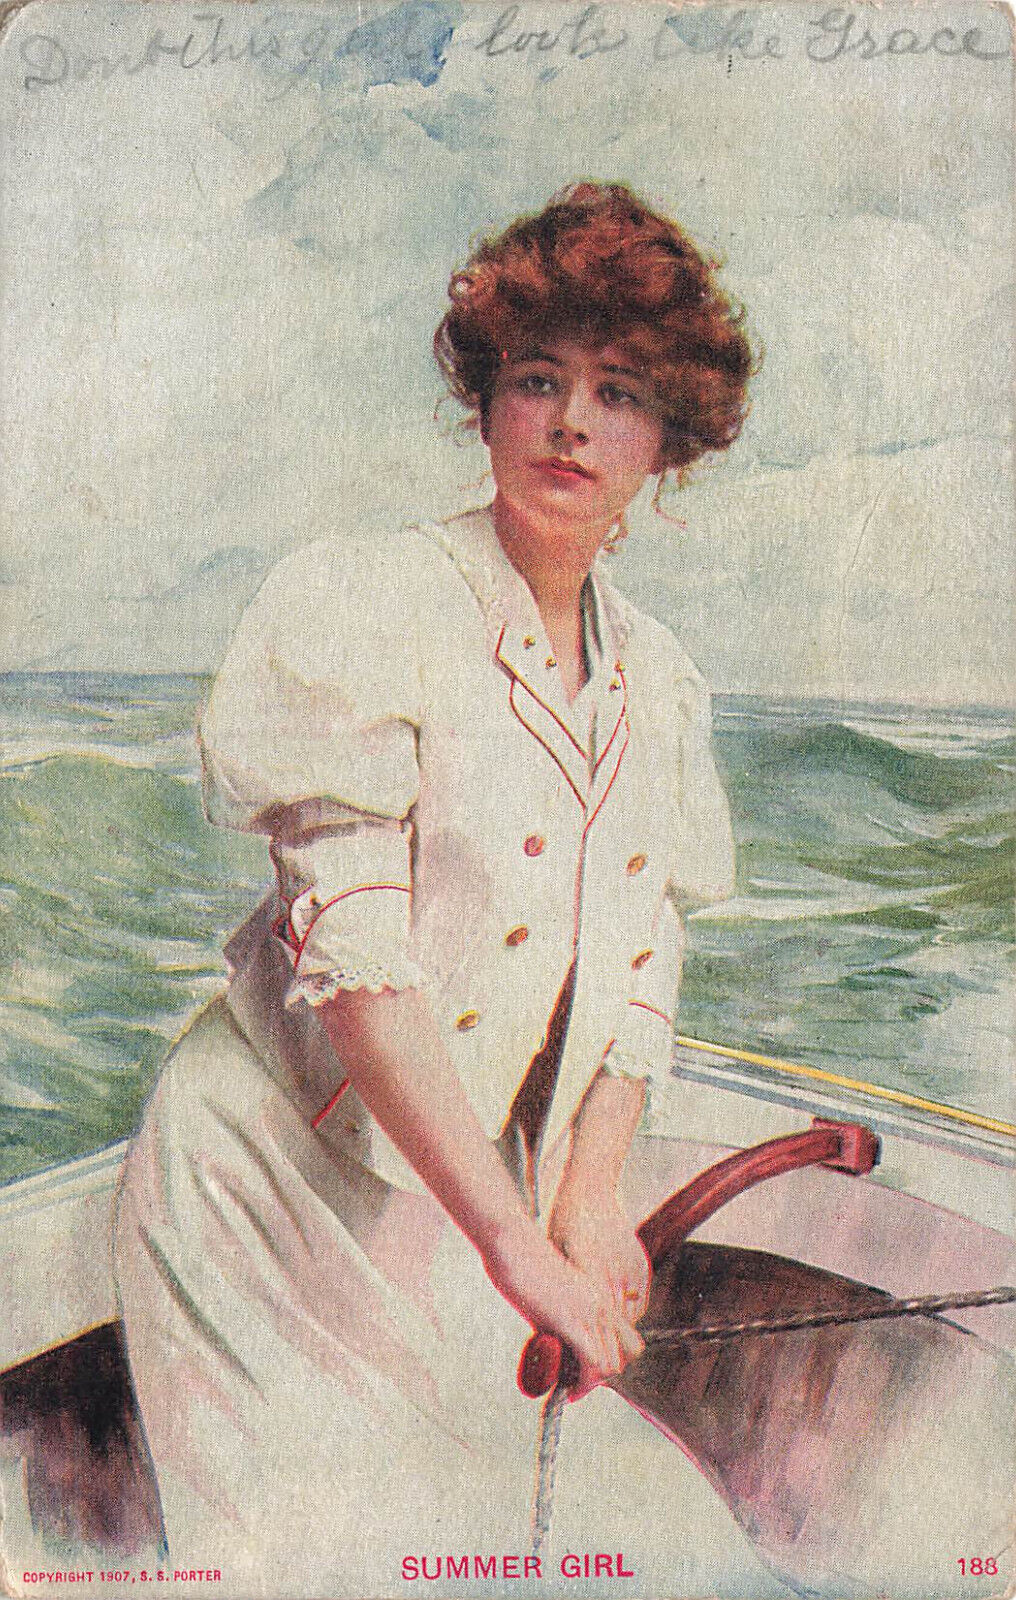 VINTAGE PRETTY WOMAN POSTCARD SUMMER GIRL AT HELM OF SAILBOAT 1909 102022 R